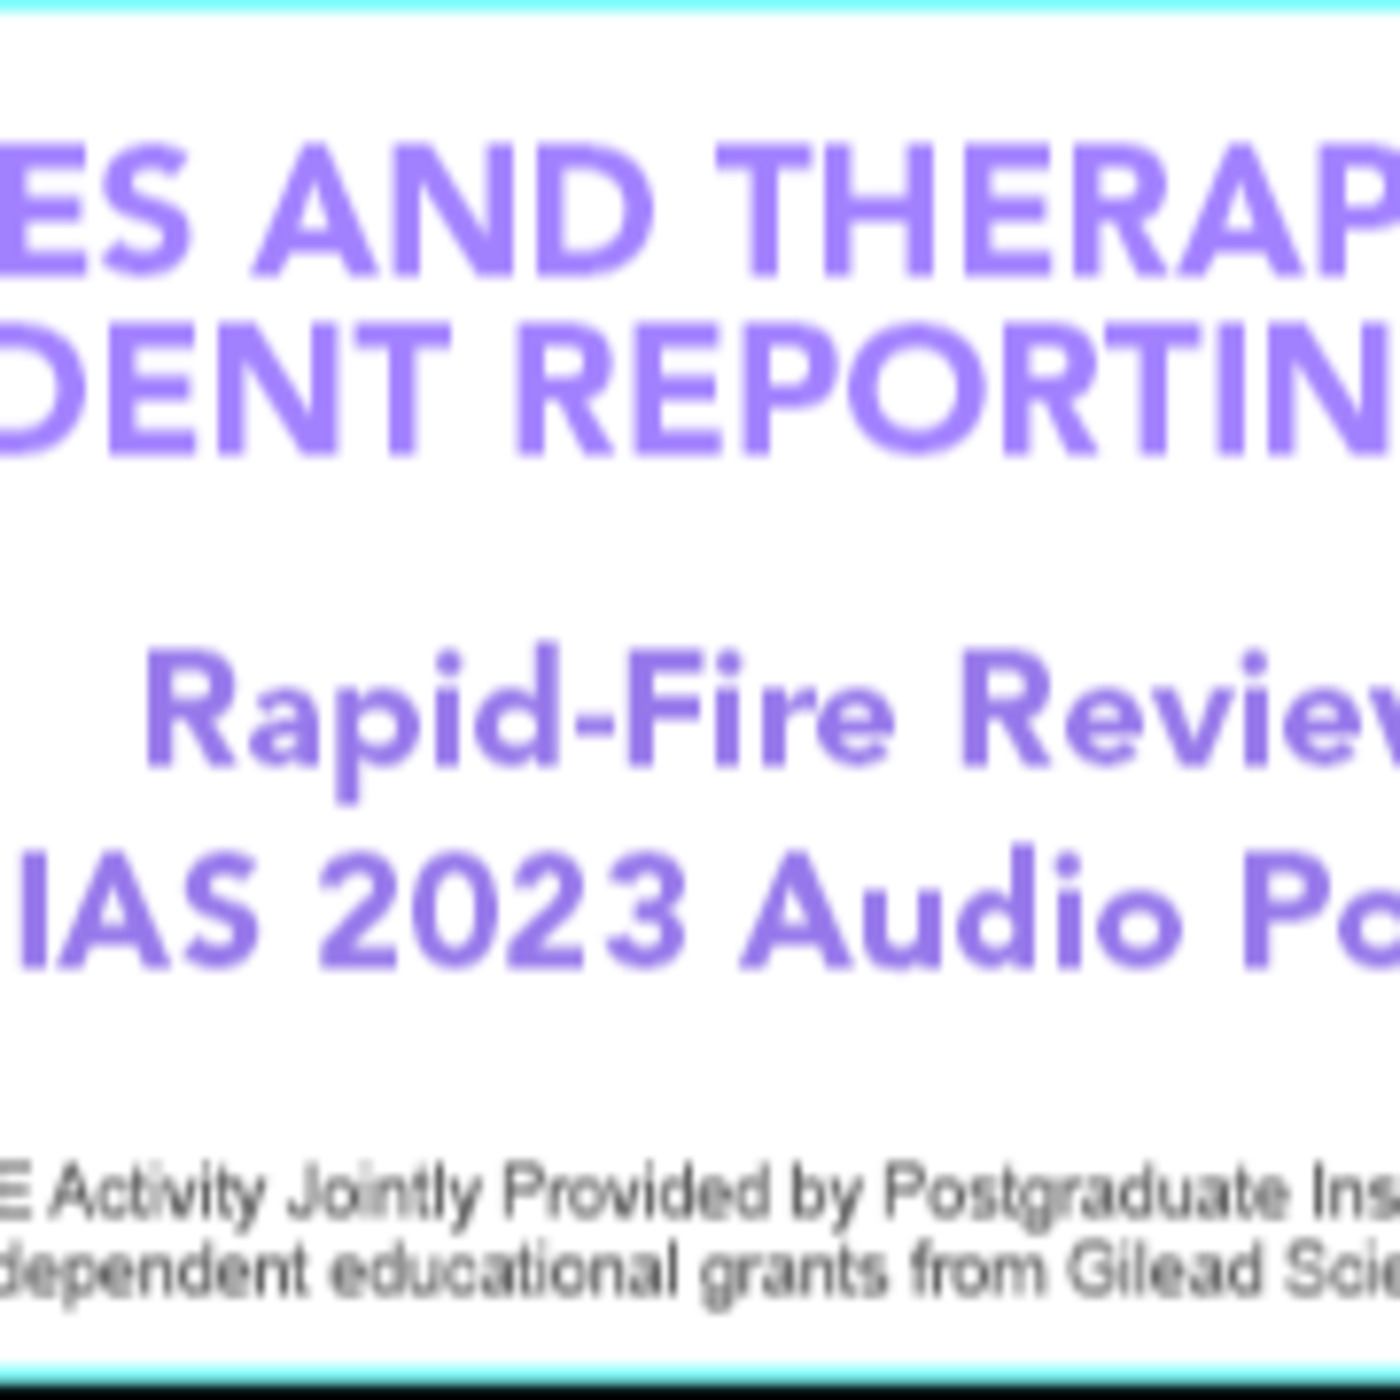 Rapid-Fire Review of IAS 2023